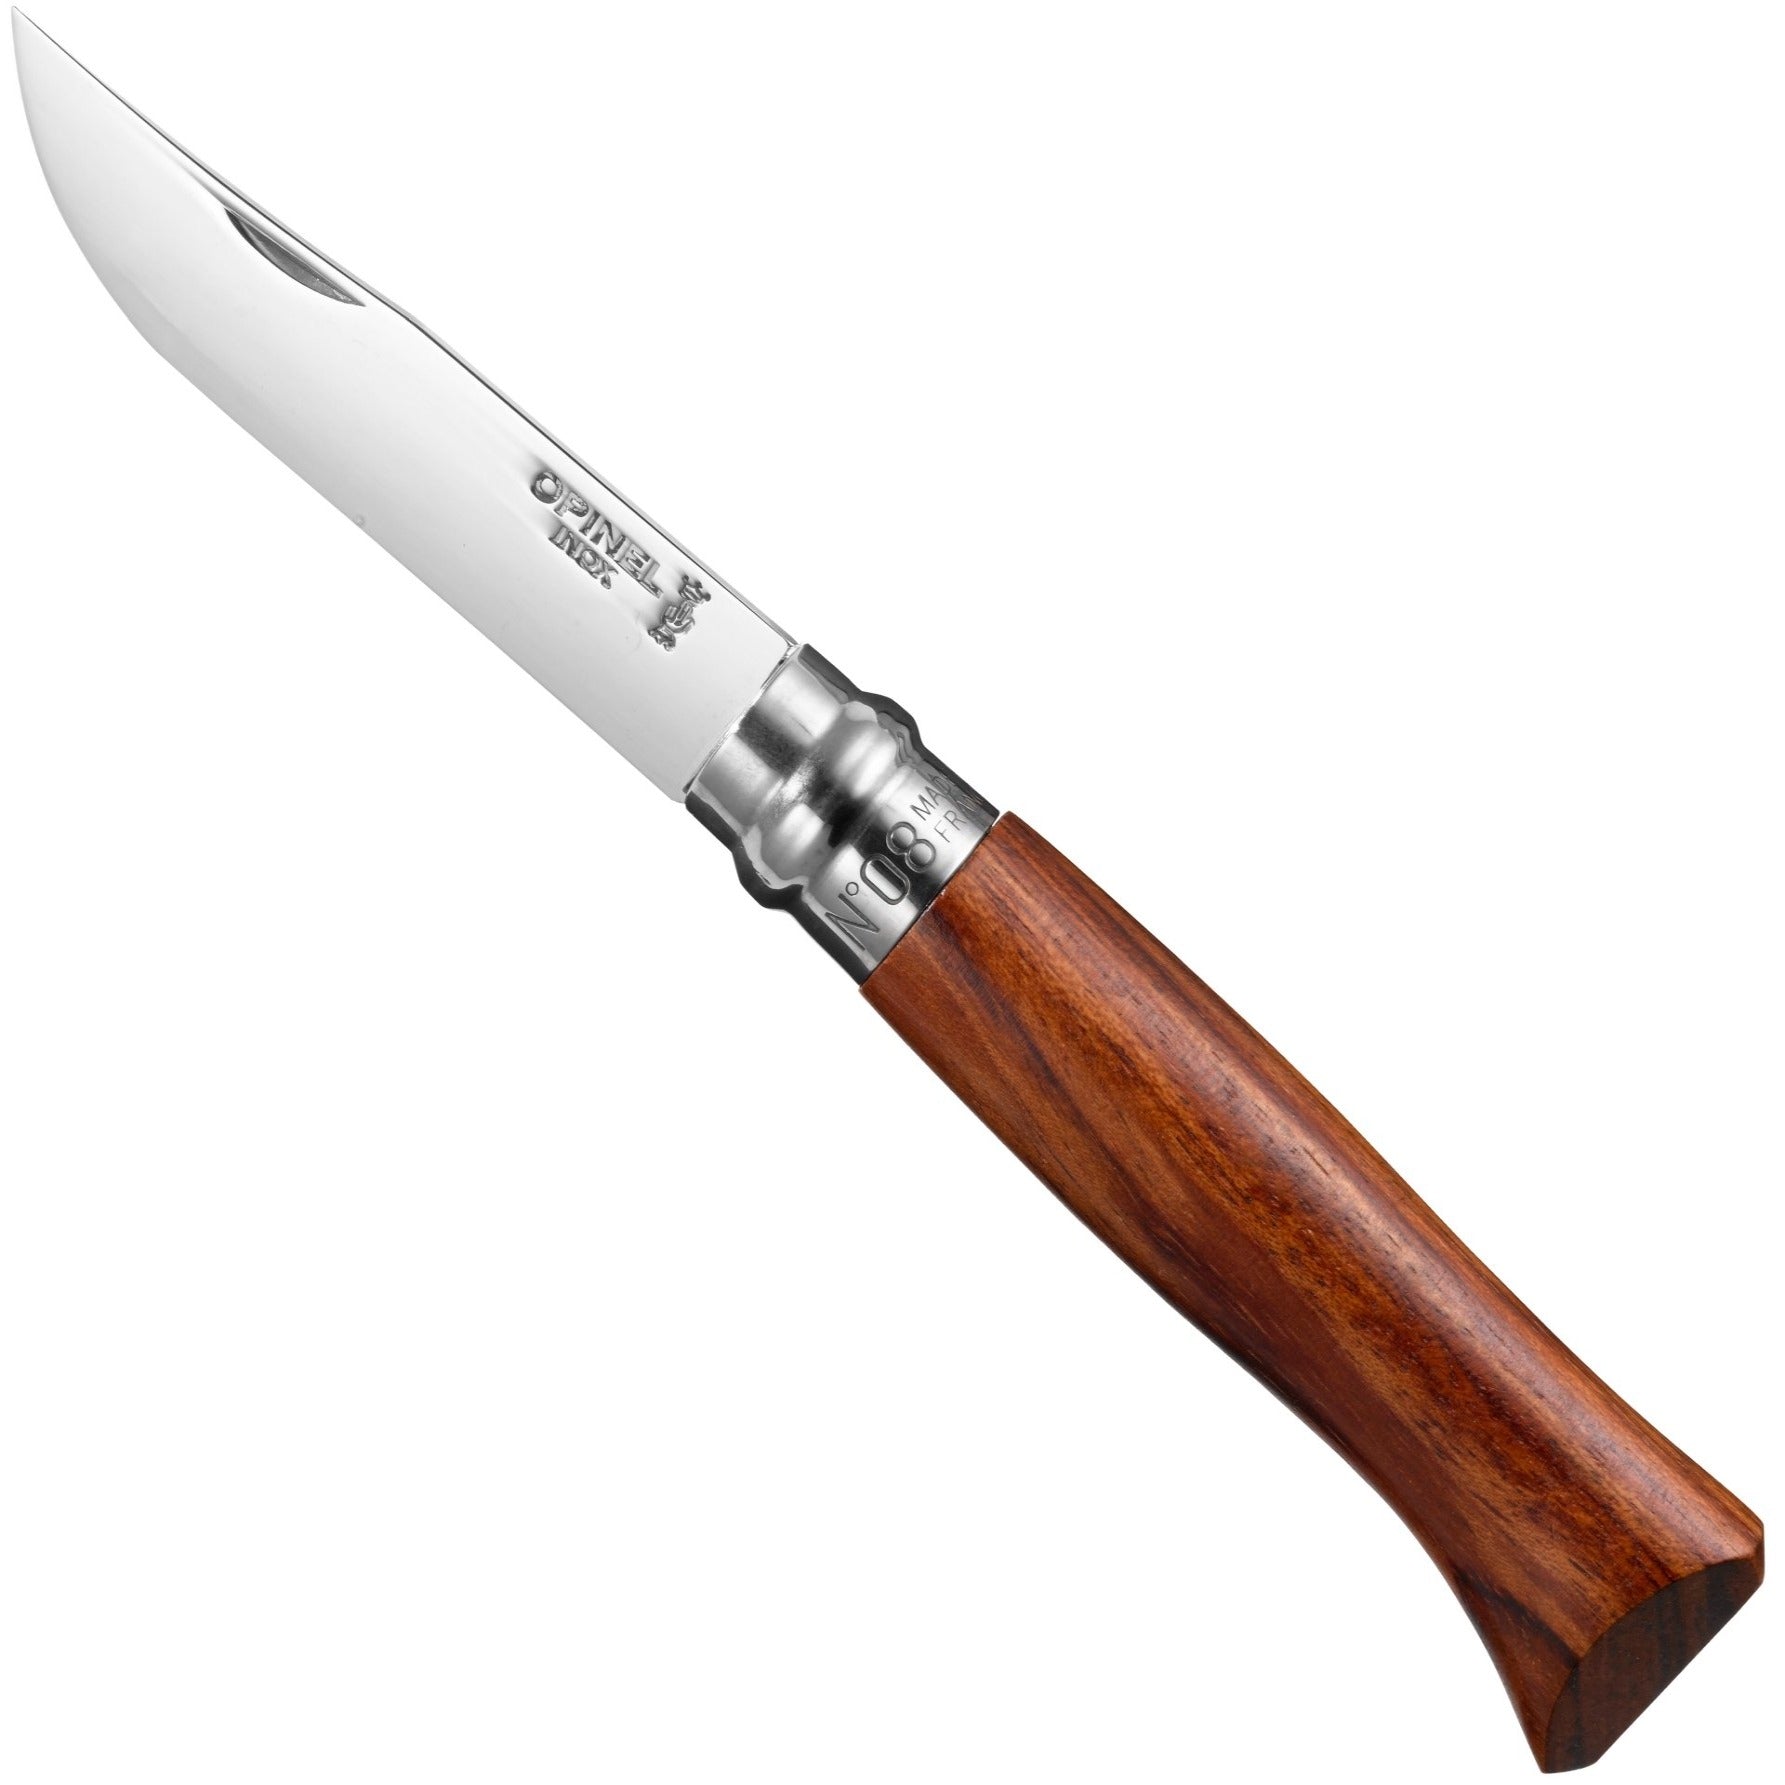 Opinel  No.08 Stainless Steel Pocket Knife - Padouk - OPINEL USA